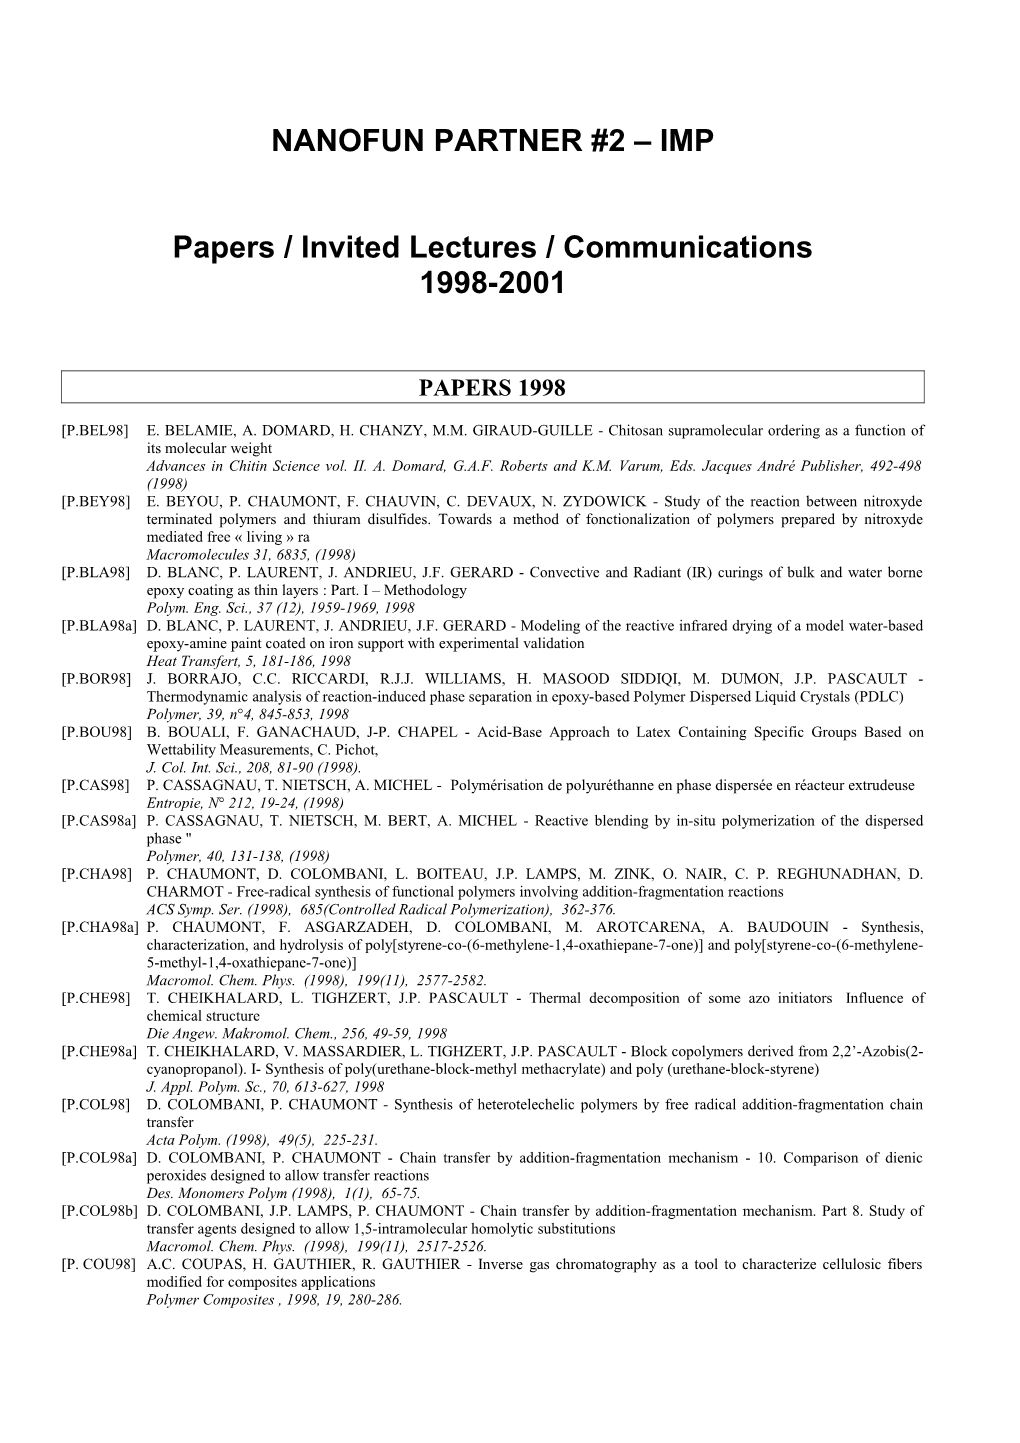 Papers / Invited Lectures / Communications